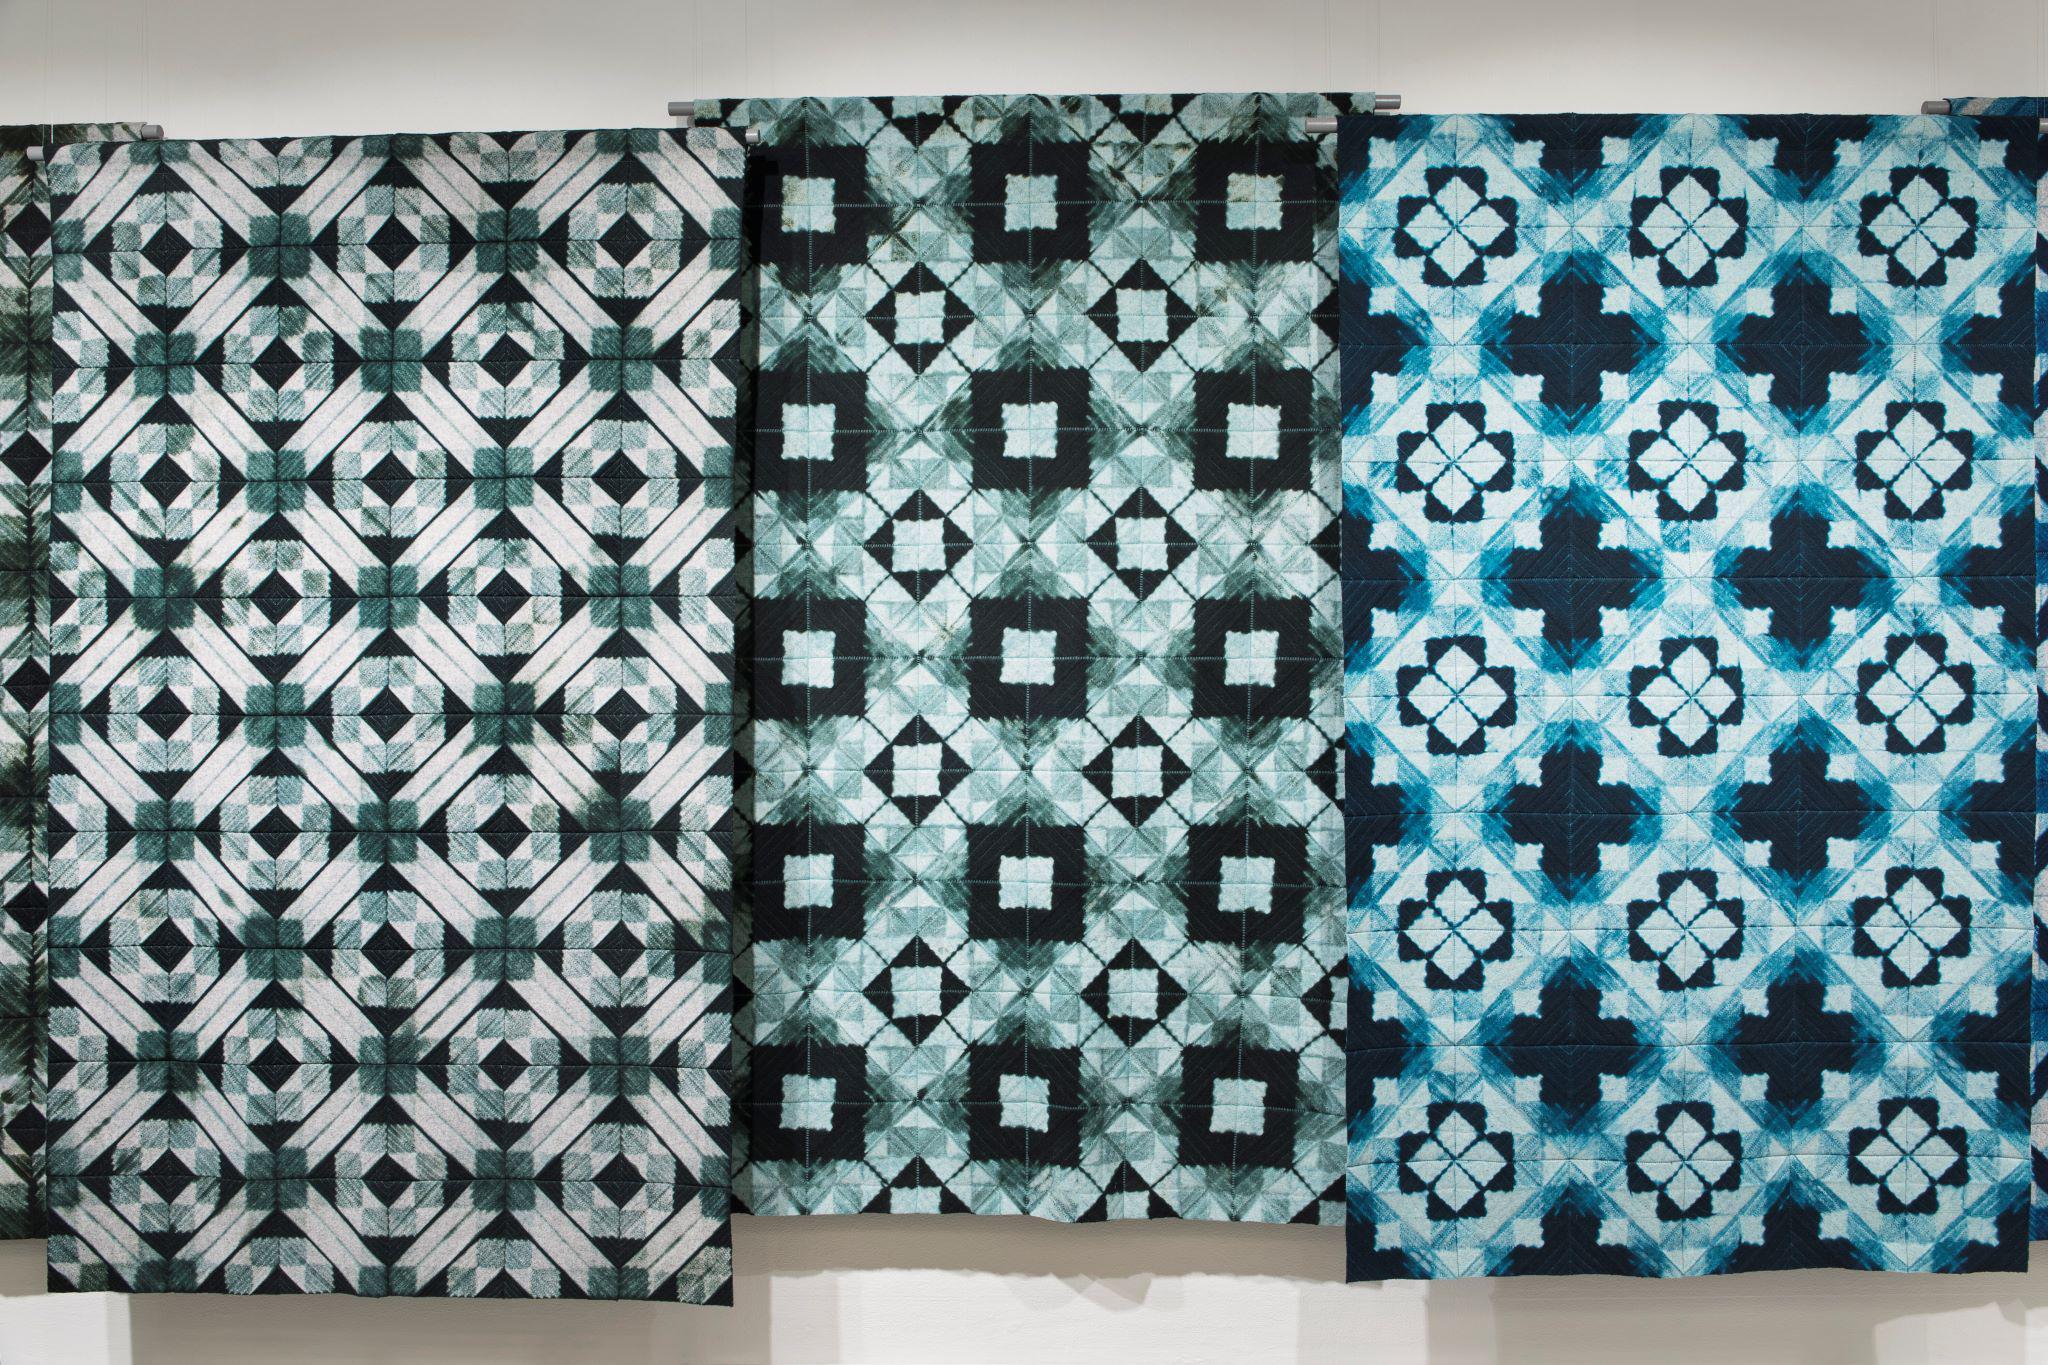 The textile designs with different patterns in nuances of blue.